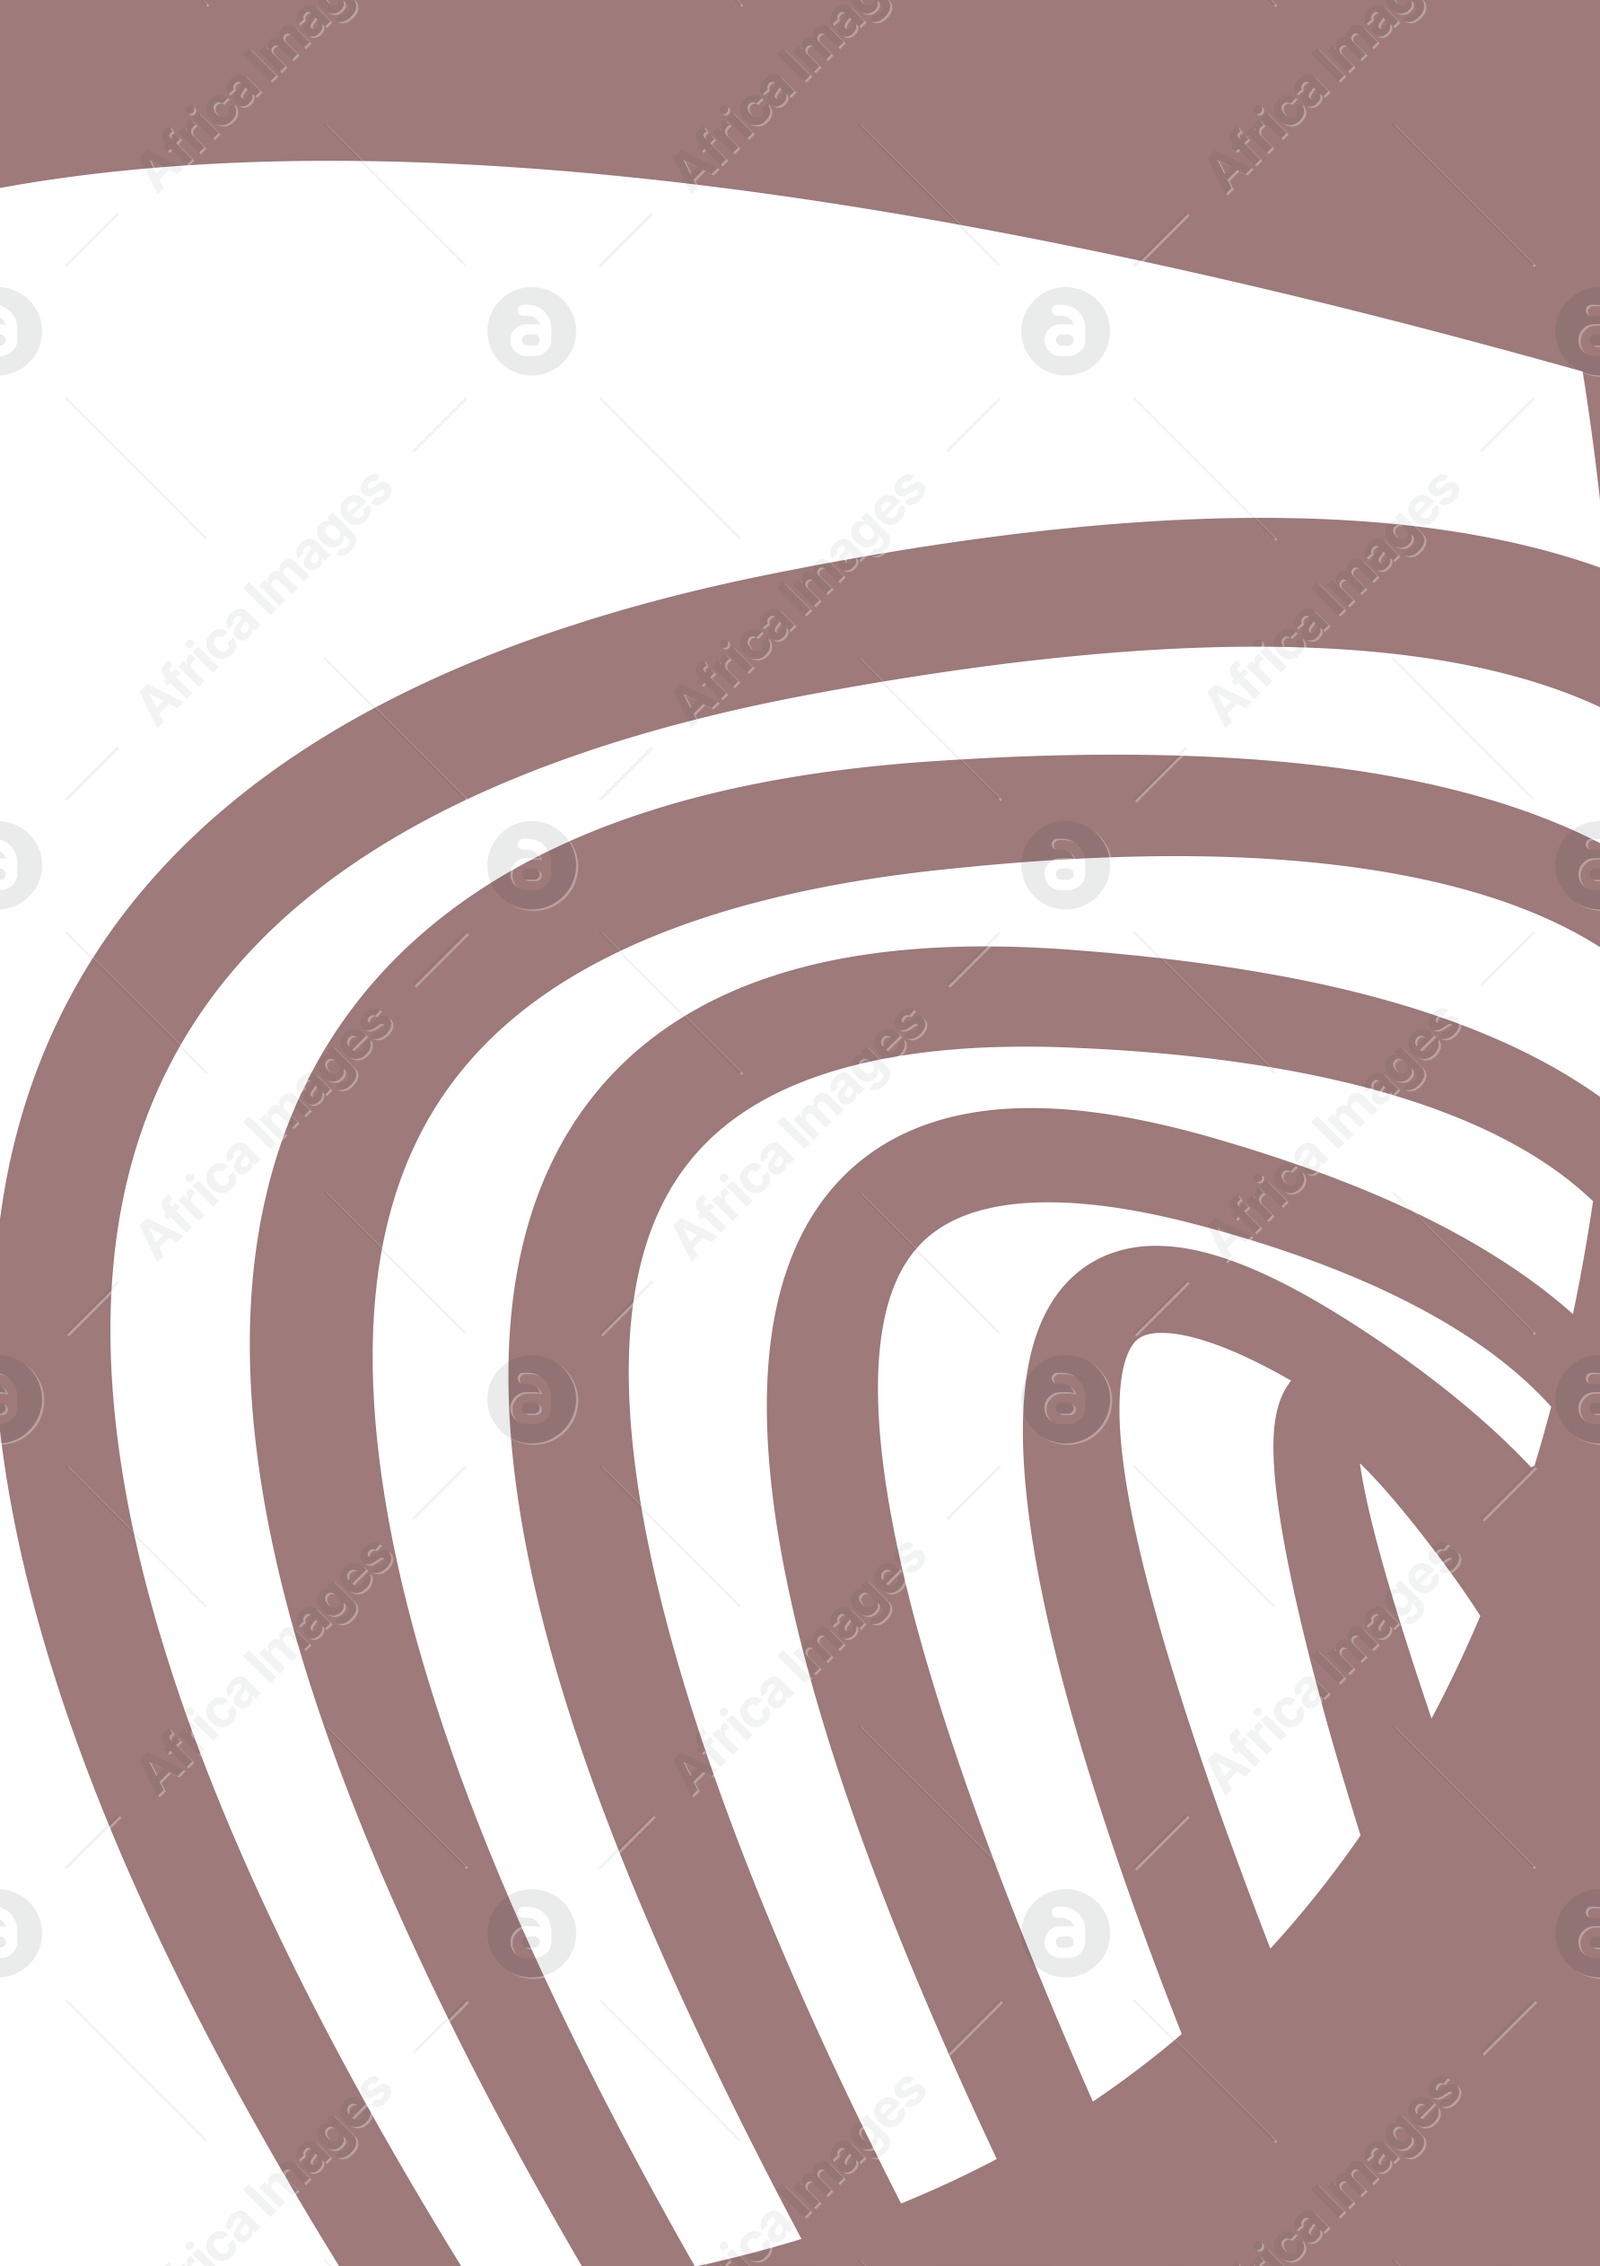 Illustration of Beautiful image with curly lines and abstract shape in shade of brown color